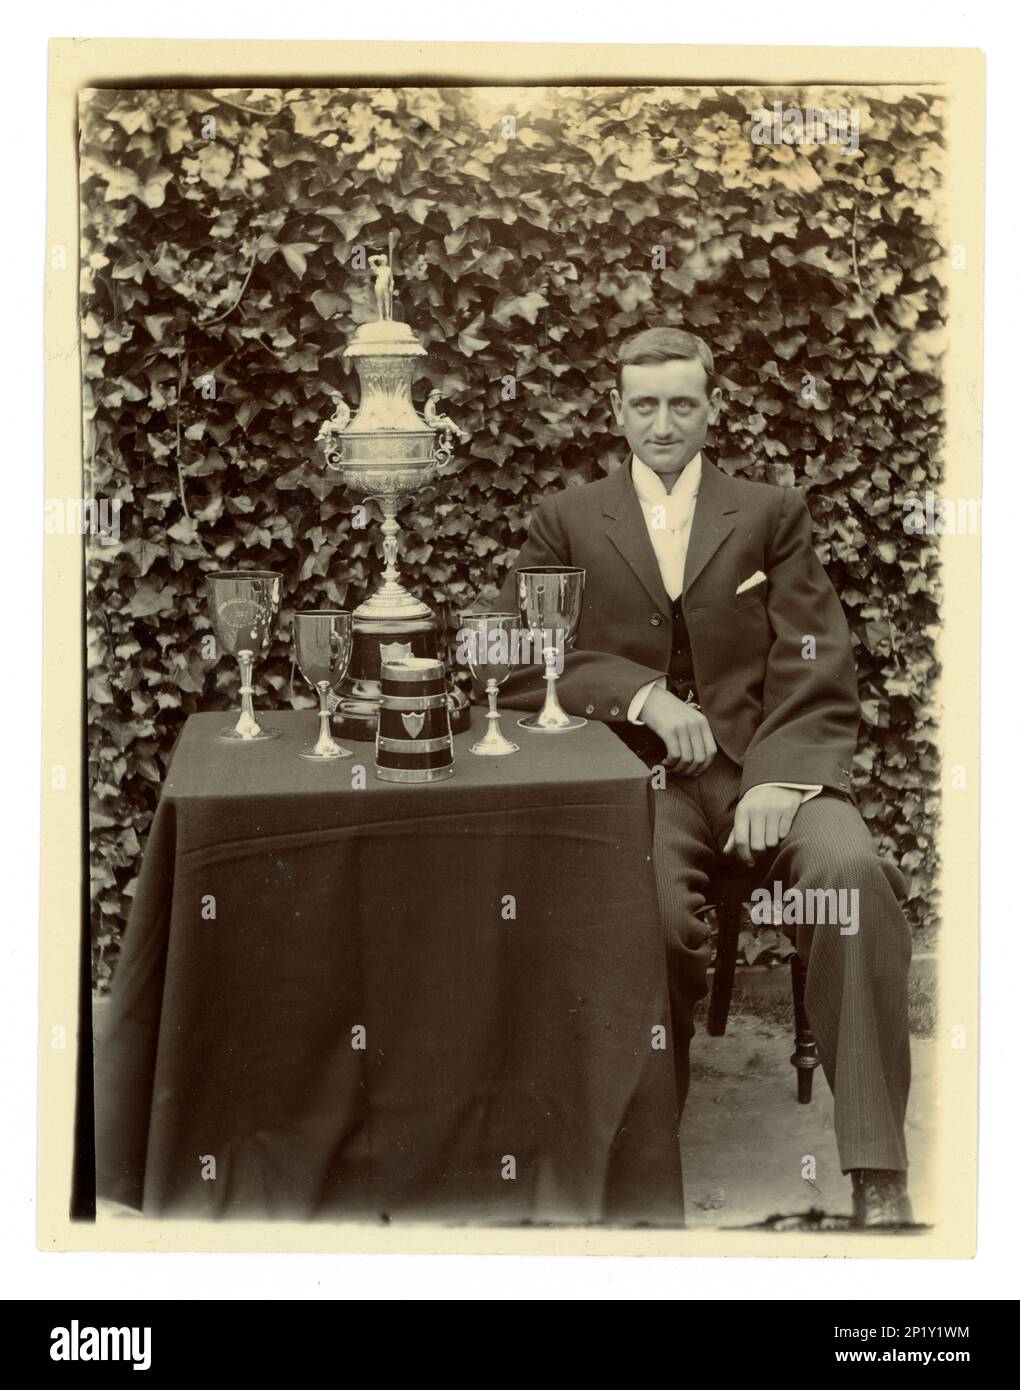 Original Victorian photograph of gent, on a table there is displayed a large Worcester challenge vase, / regatta trophy for rowing, and other cups,  Possibly member of a coxed four crew. Worcester area, U.K.  circa 1897-1899 Stock Photo